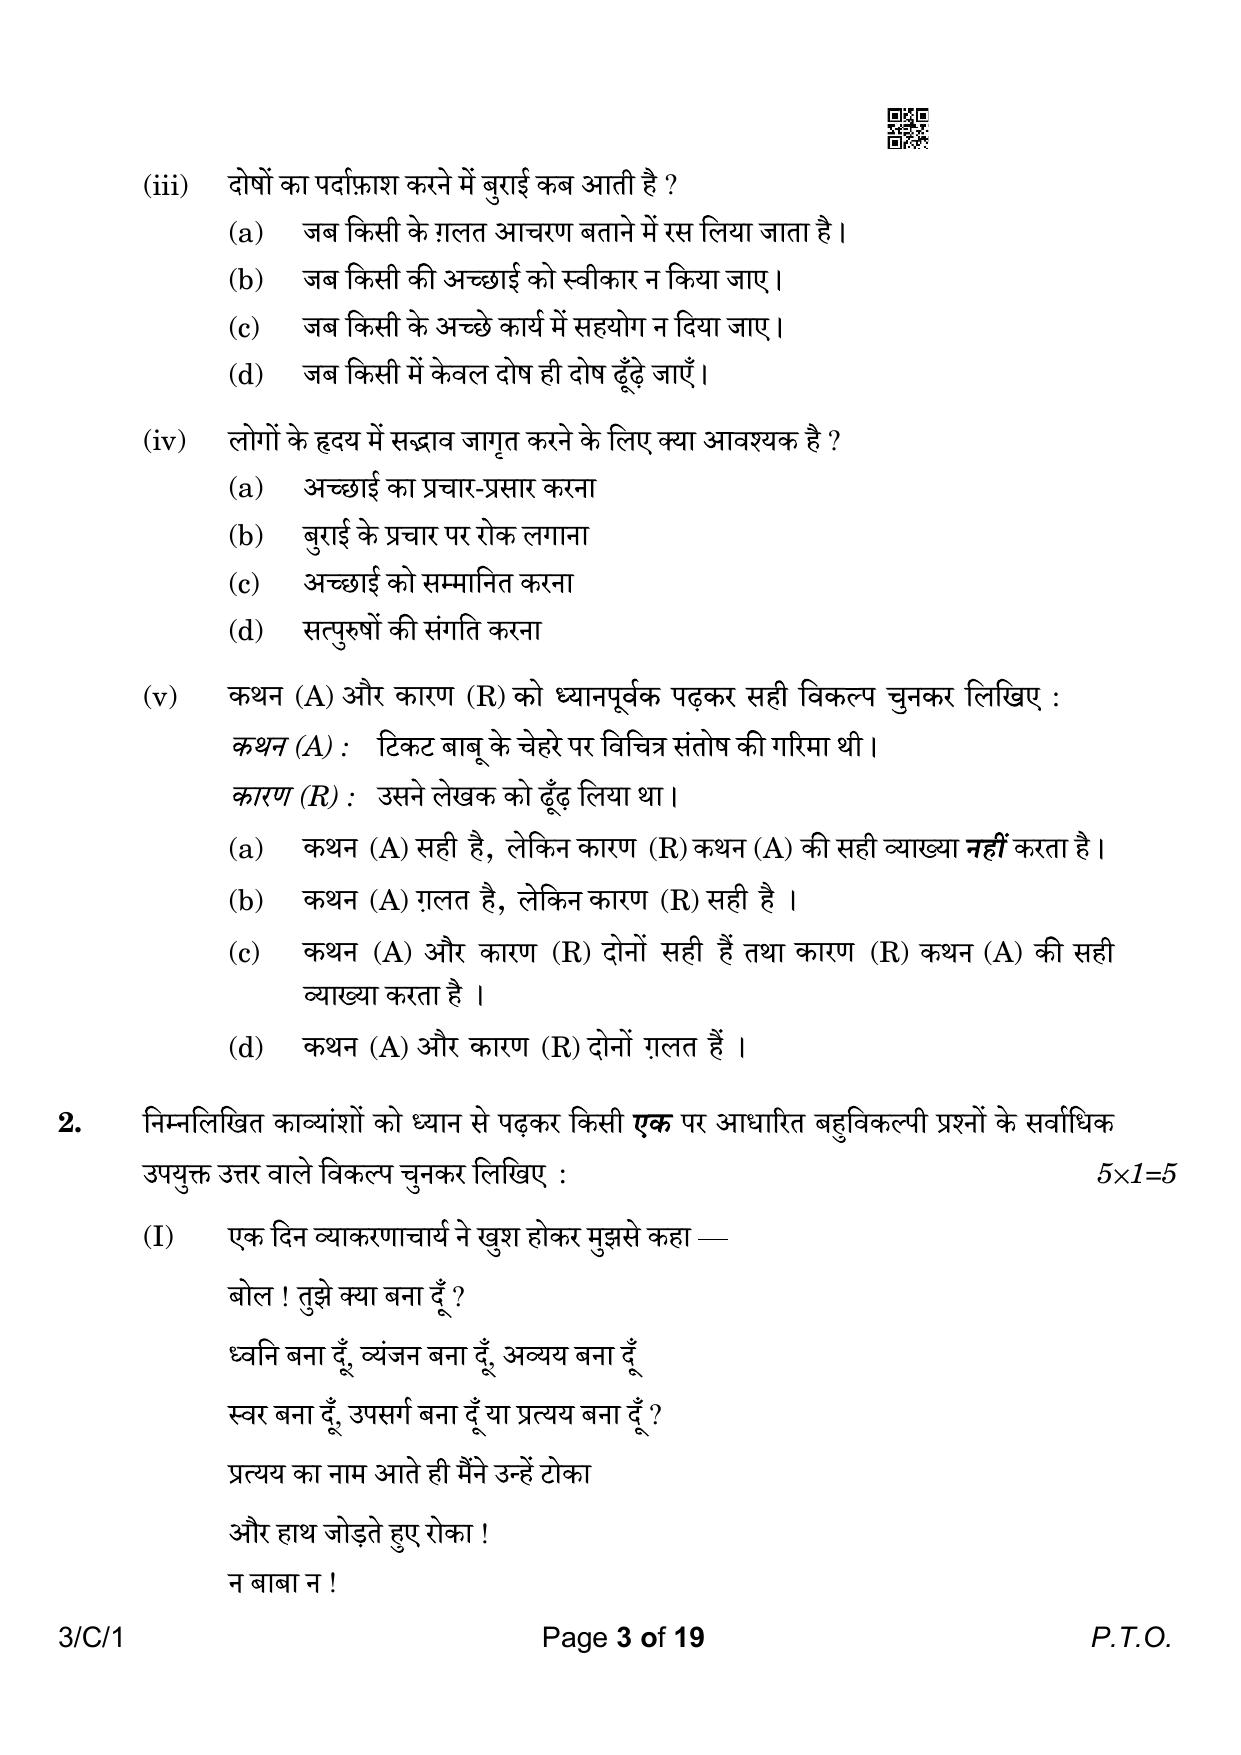 CBSE Class 10 3-1 Hindi A 2023 (Compartment) Question Paper - Page 3